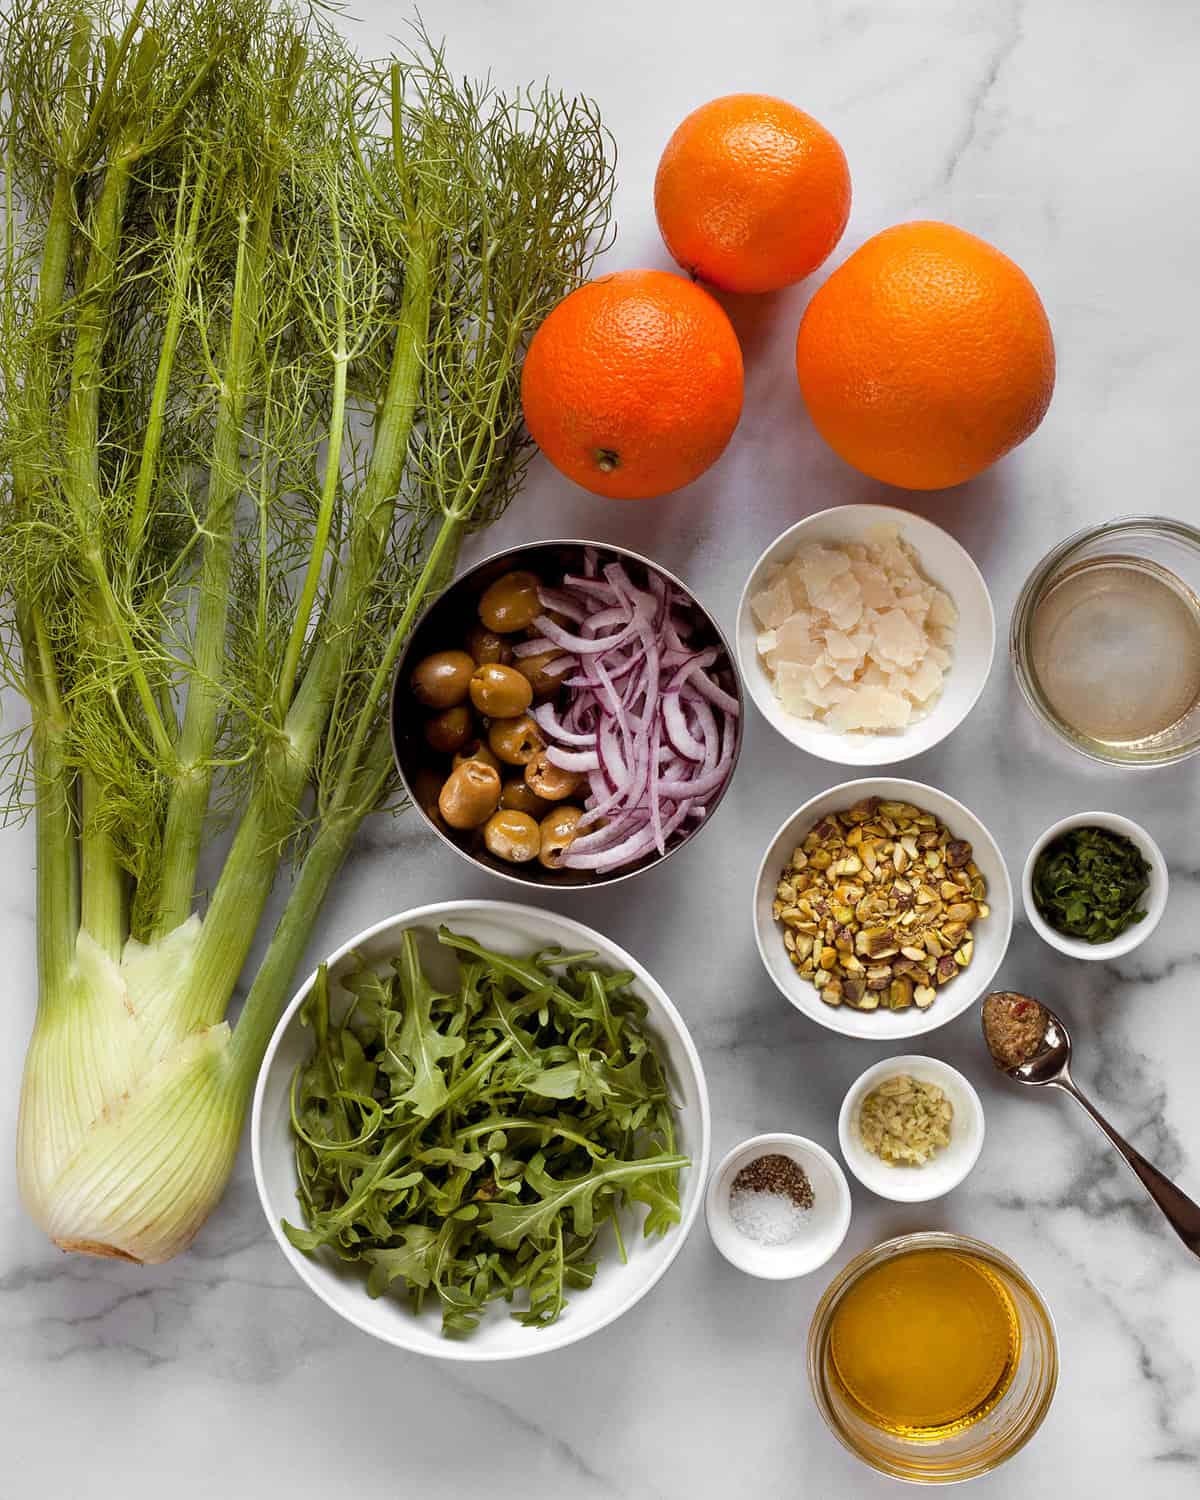 Ingredients including, fennel, oranges, onions, pistachios, garlic, mustard, vinegar and olive oil.